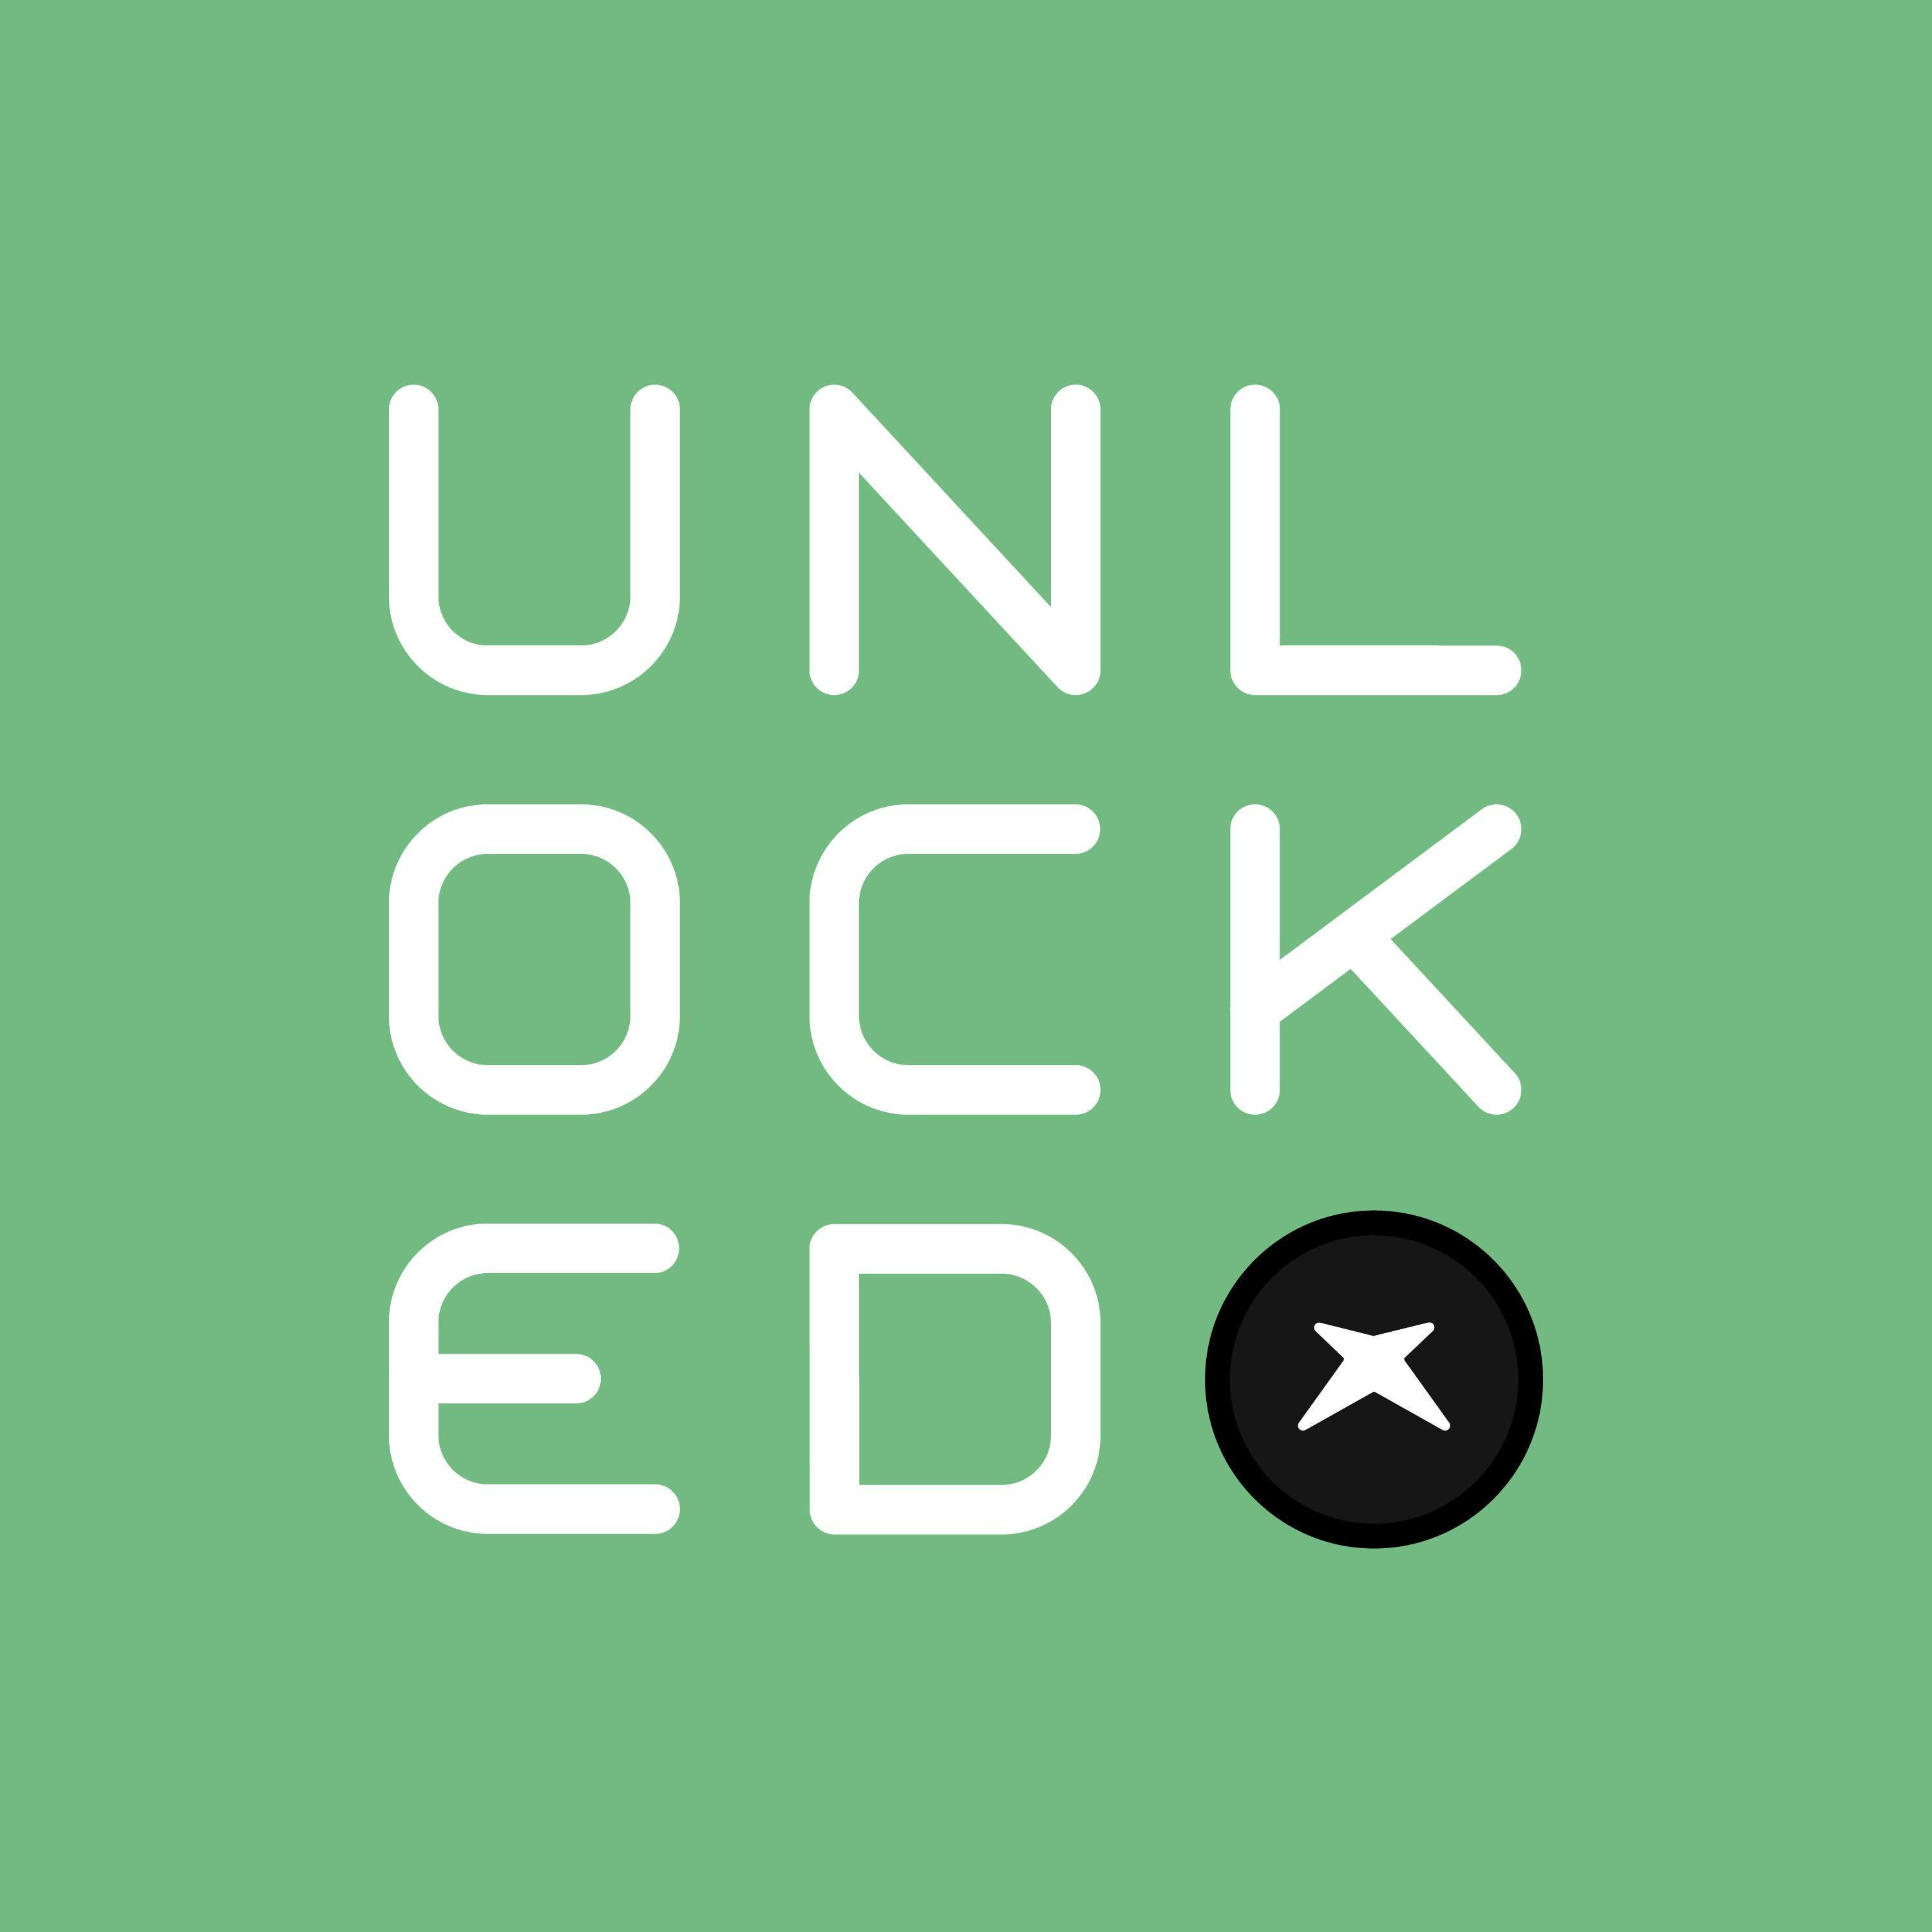 Podcast Unlocked Episode 192: Why We're Worried About Star Wars Battlefront